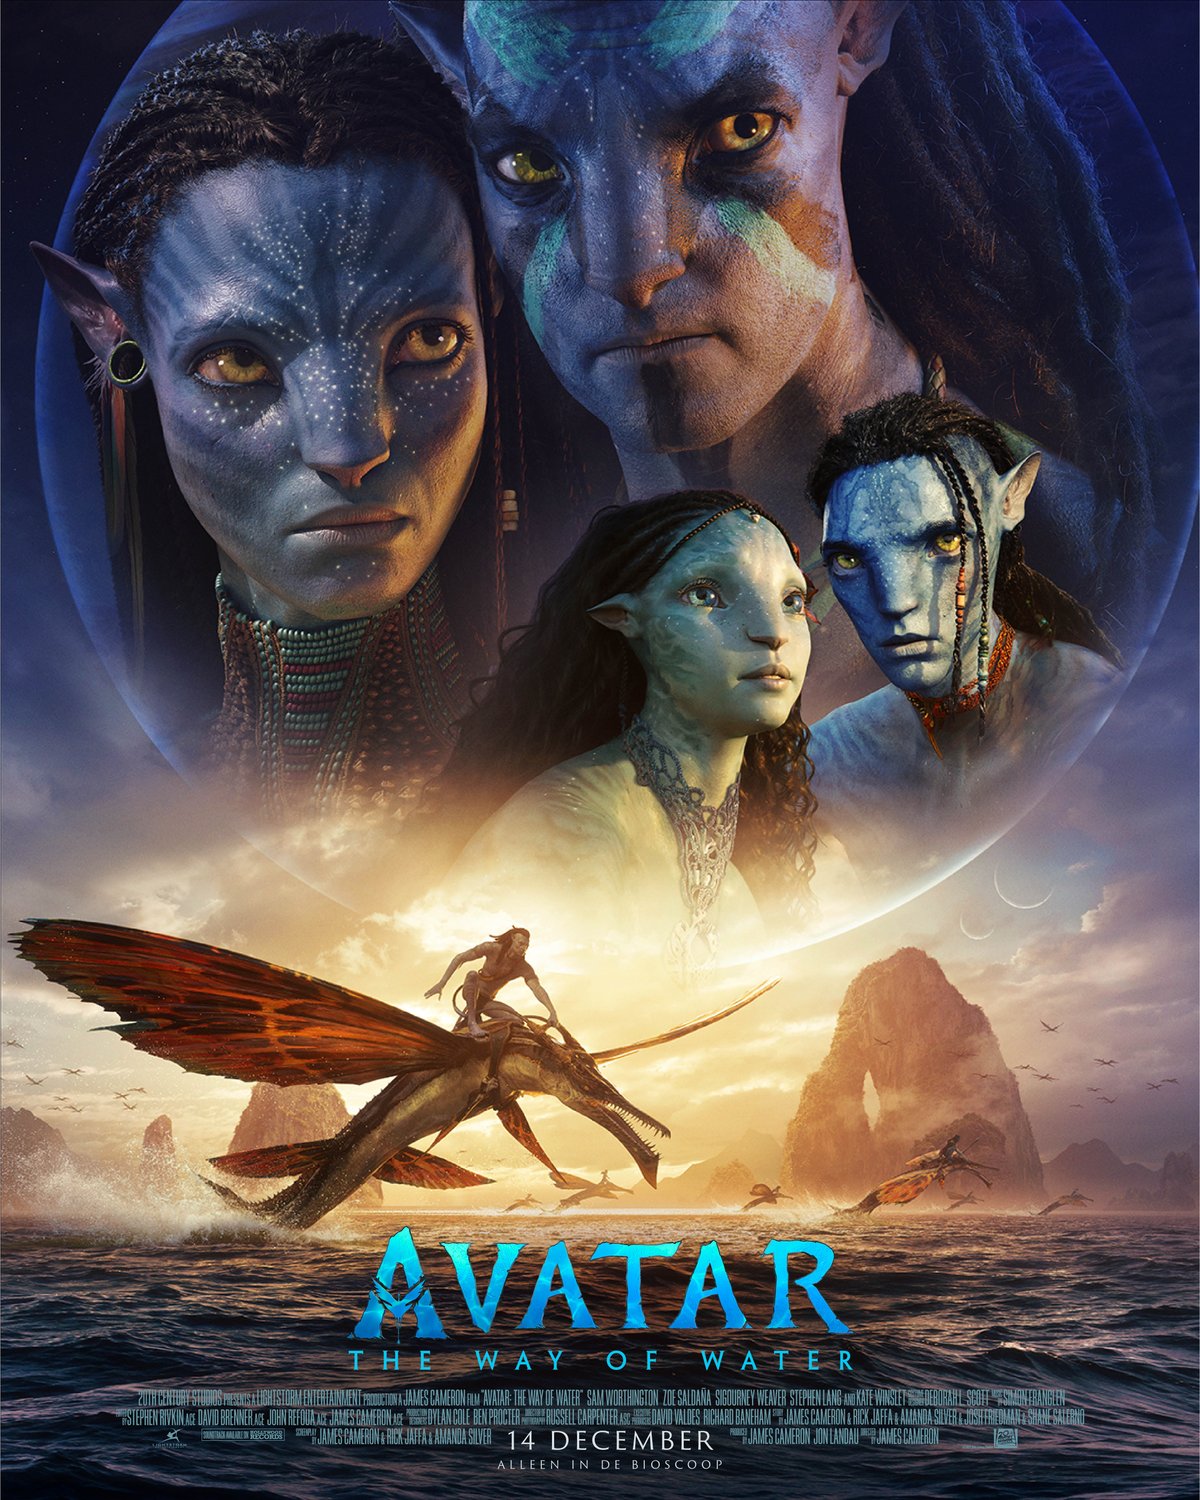 AVATAR:THE WAY OF WATER